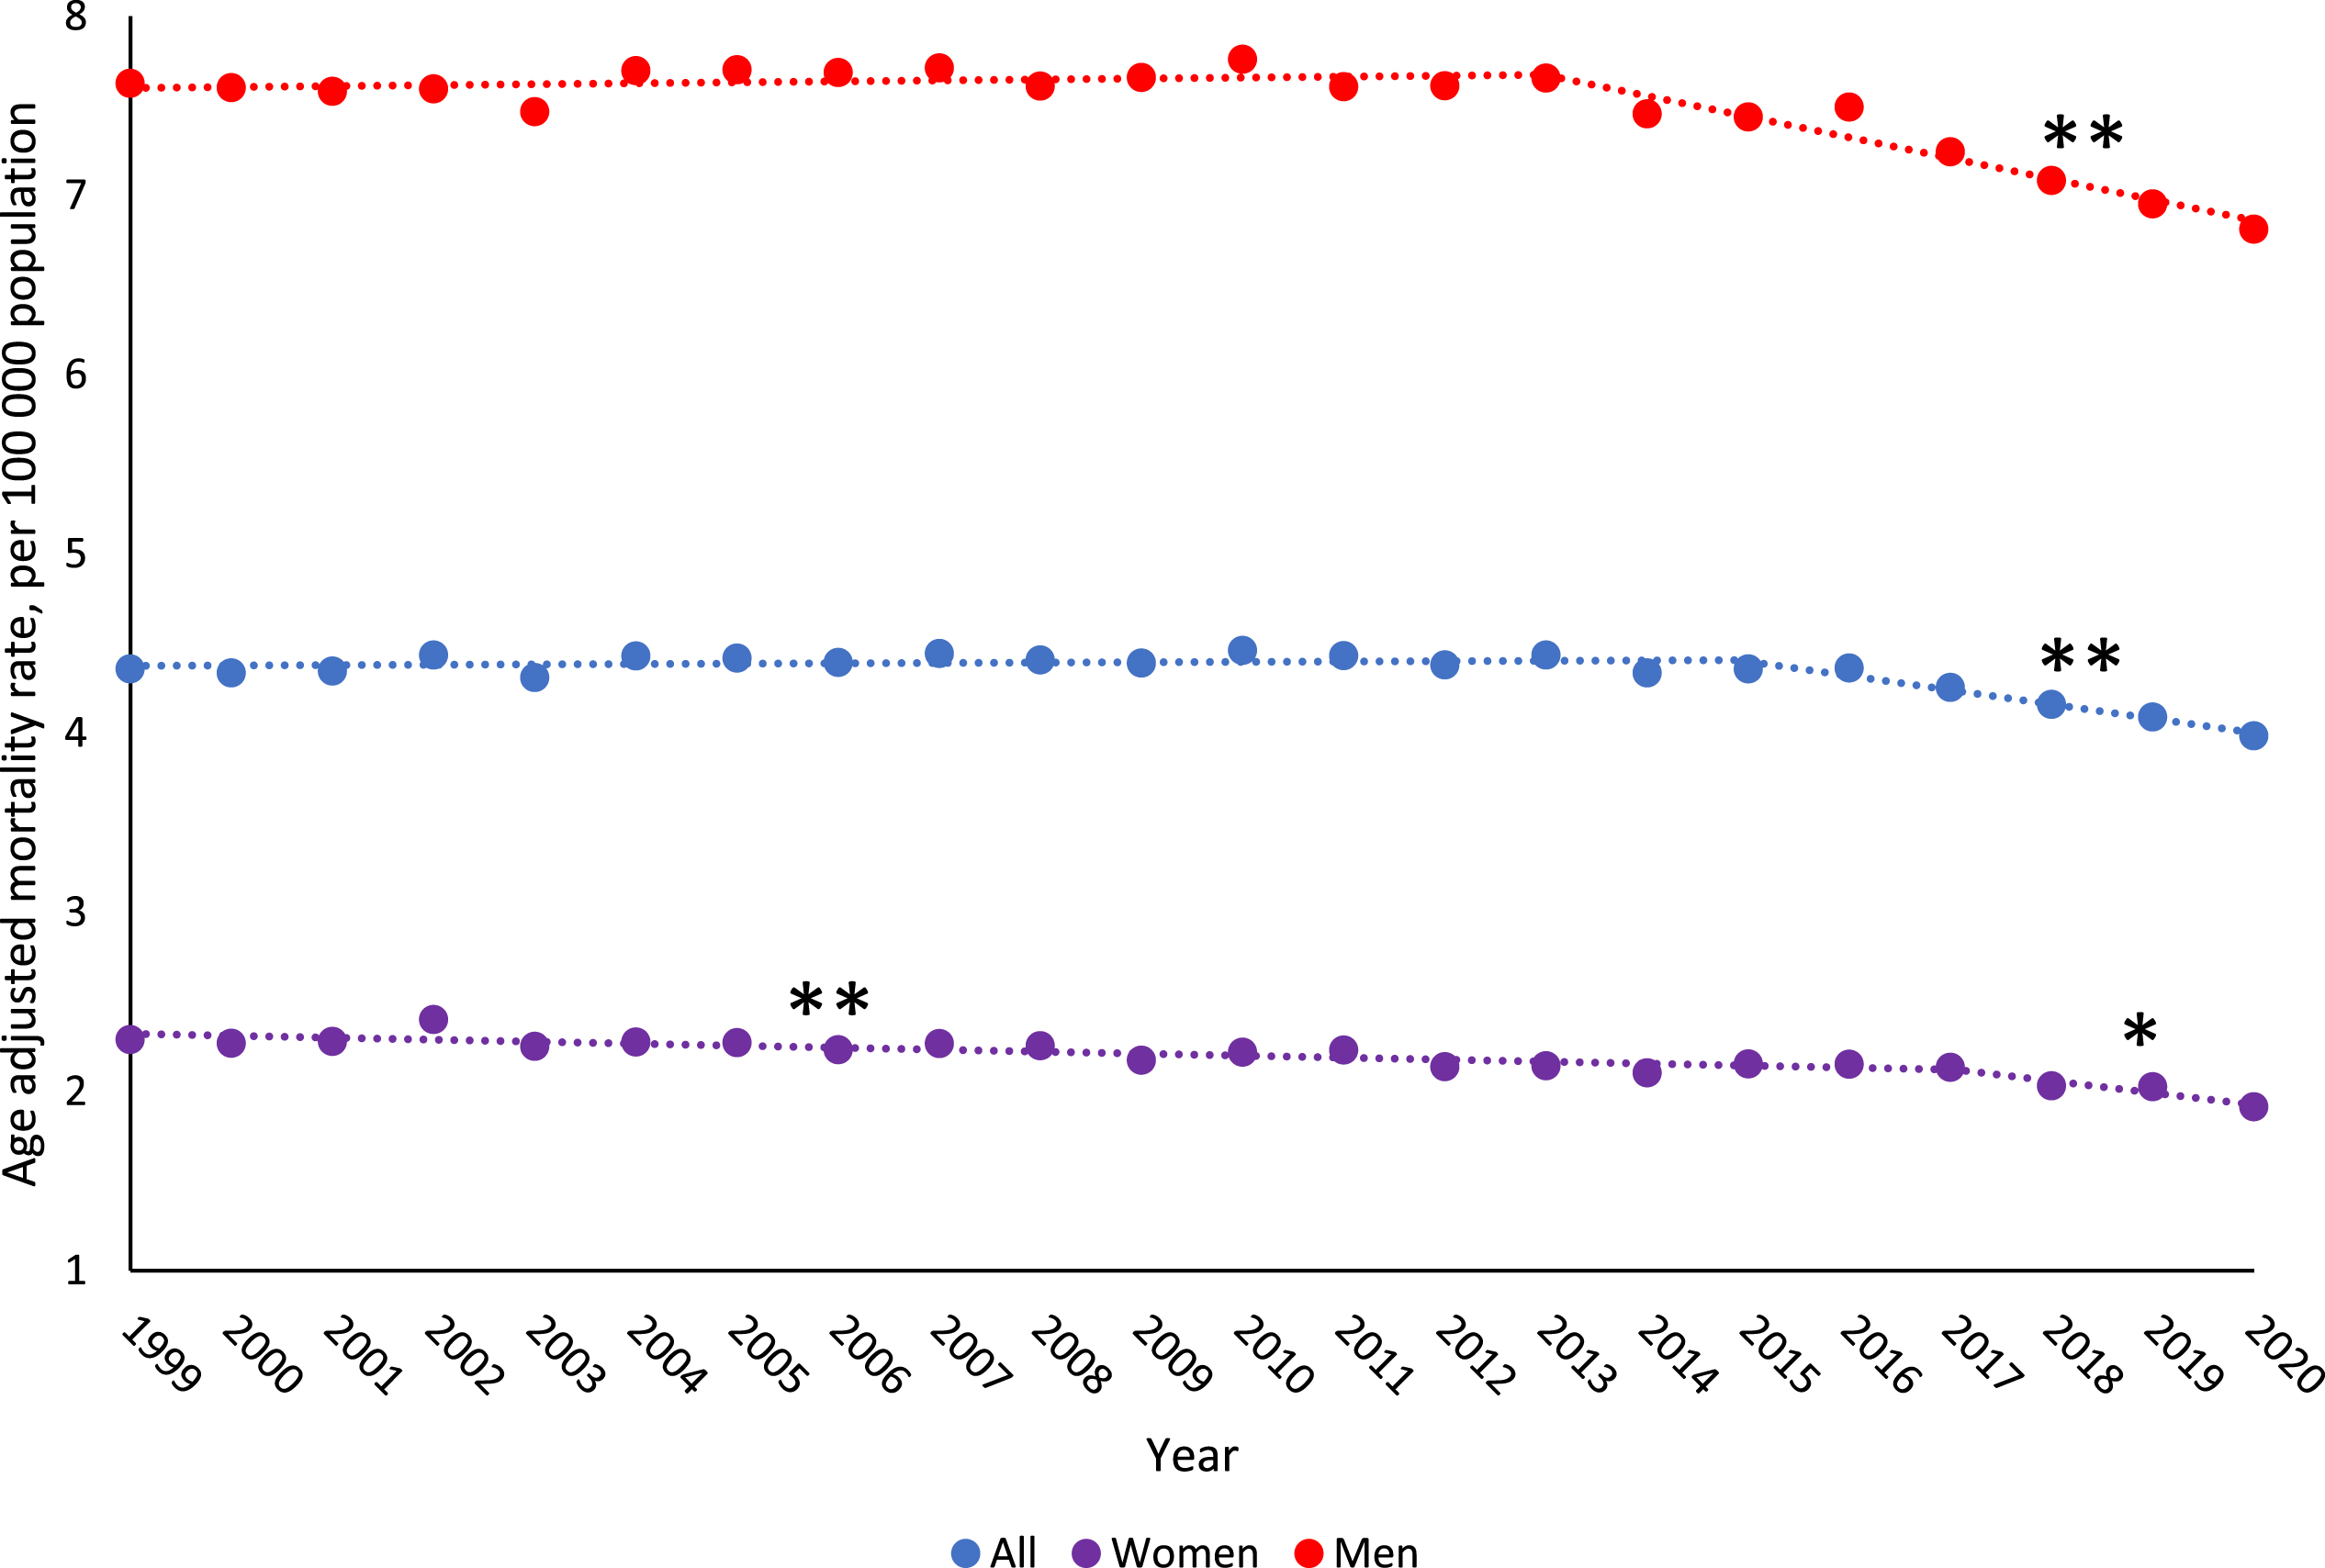 Trends in age-adjusted bladder cancer death rates from 1999–2020 among US population by gender. Observed rates are presented per 100,000 population and represented by “•”. Modeled trends are represented by “—”. ** indicates the p-value is significant after Holm-Bonferroni correction. * indicates the p-value is < 0.05, but not significant after Holm-Bonferroni correction.